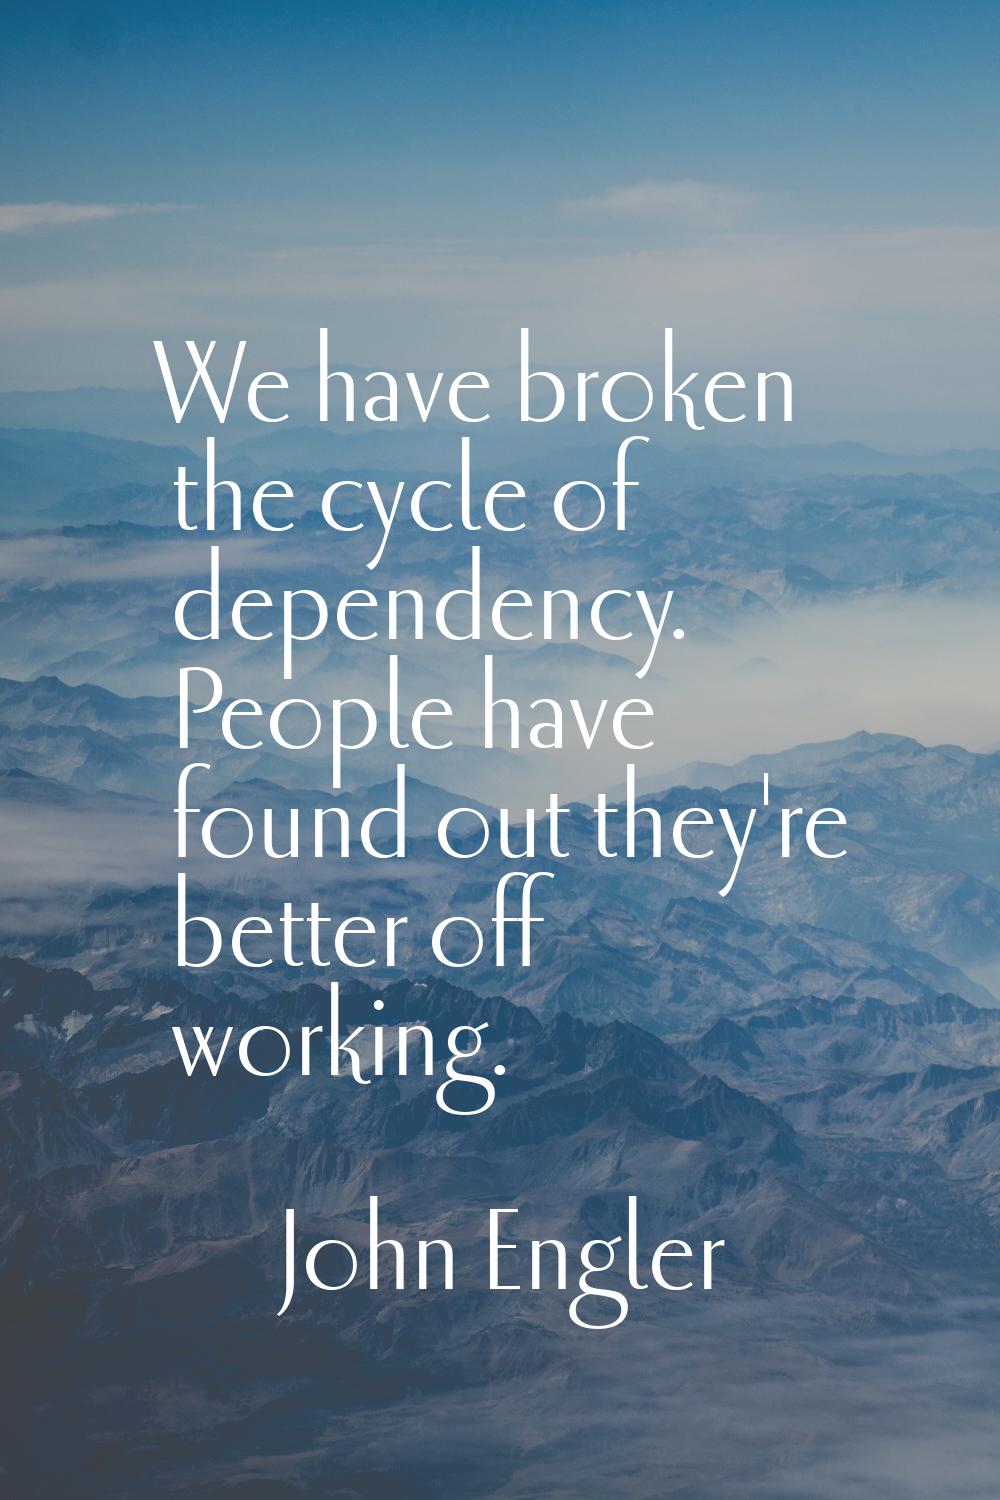 We have broken the cycle of dependency. People have found out they're better off working.